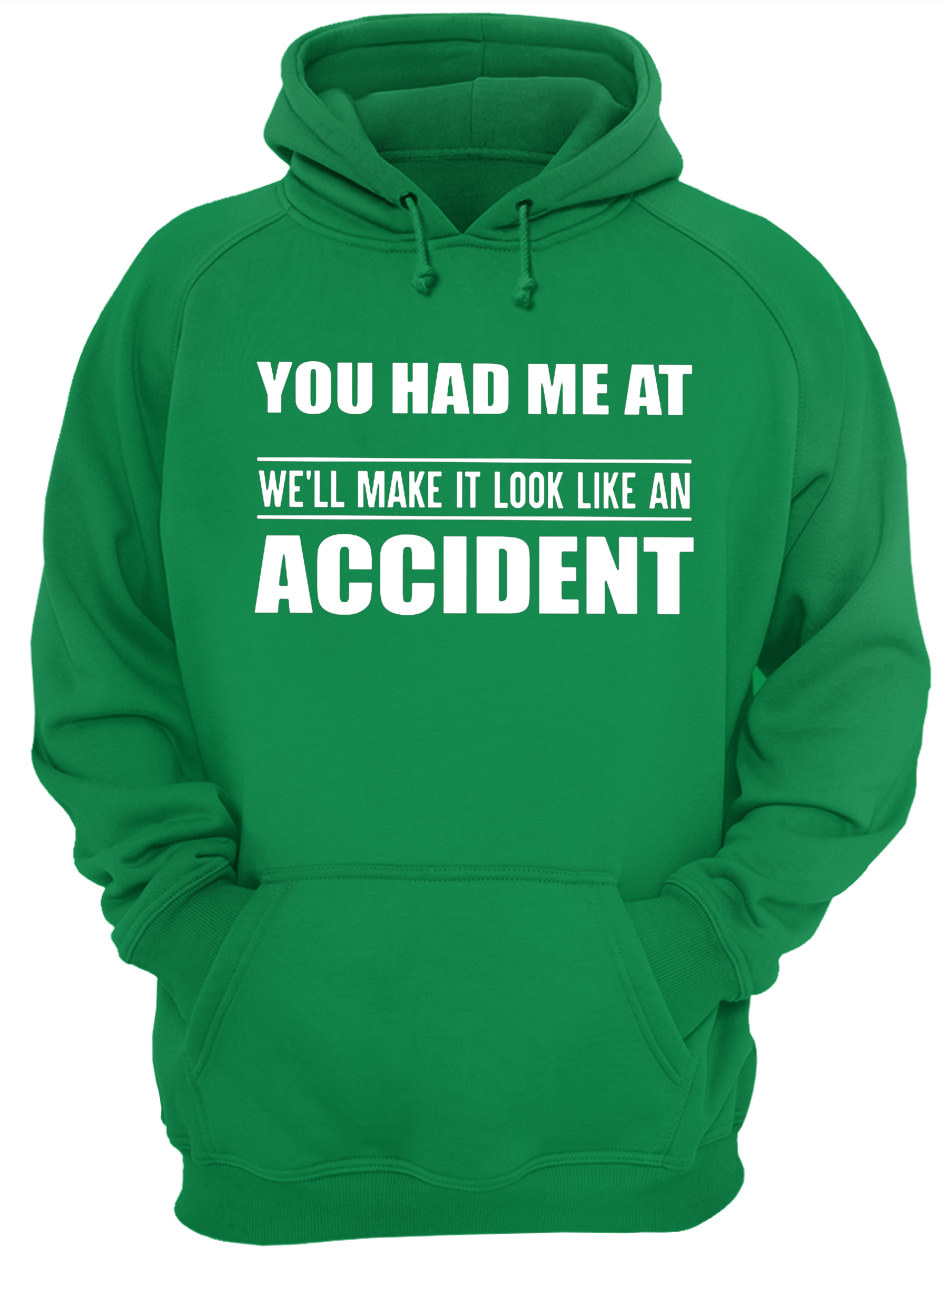 You had me at we'll make it look like an accident hoodie